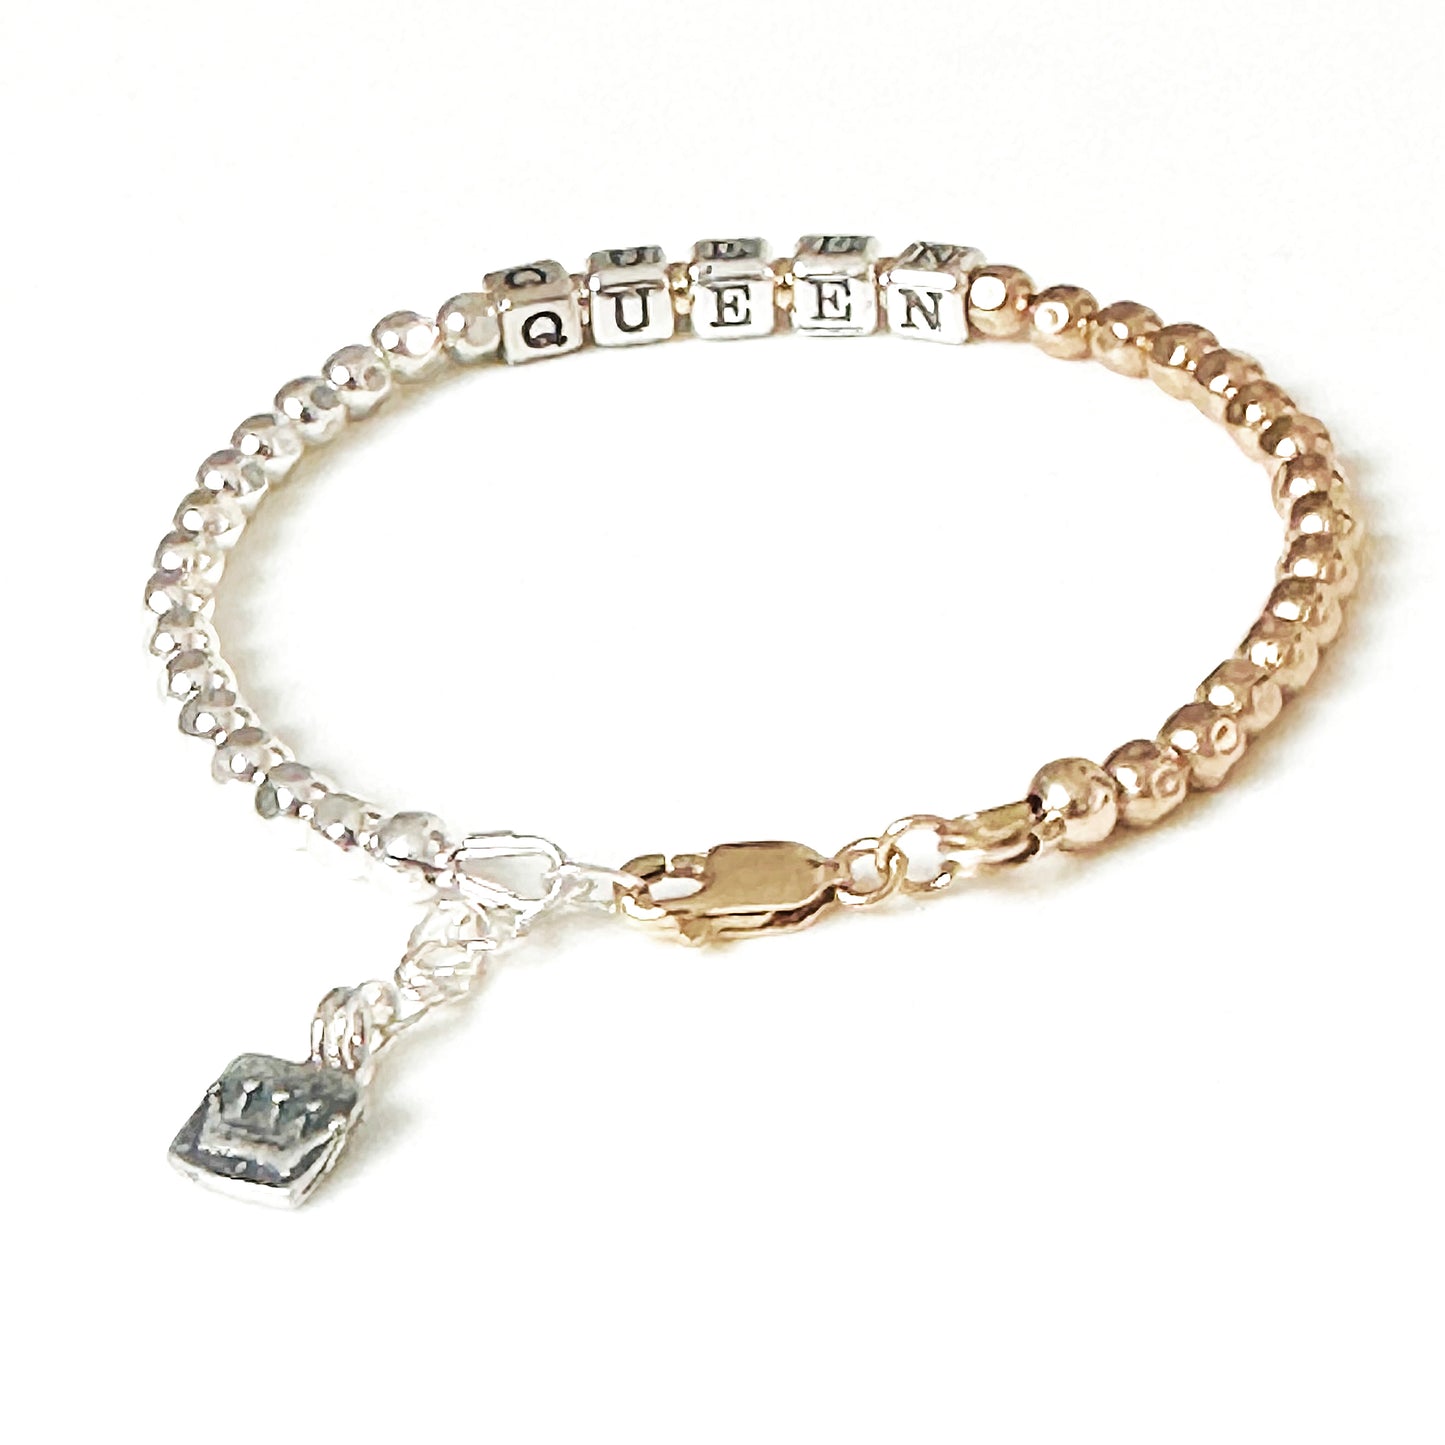 Queen Wear Your Crown Mixed Metals Sterling and 14k Gold Woman's Bracelet